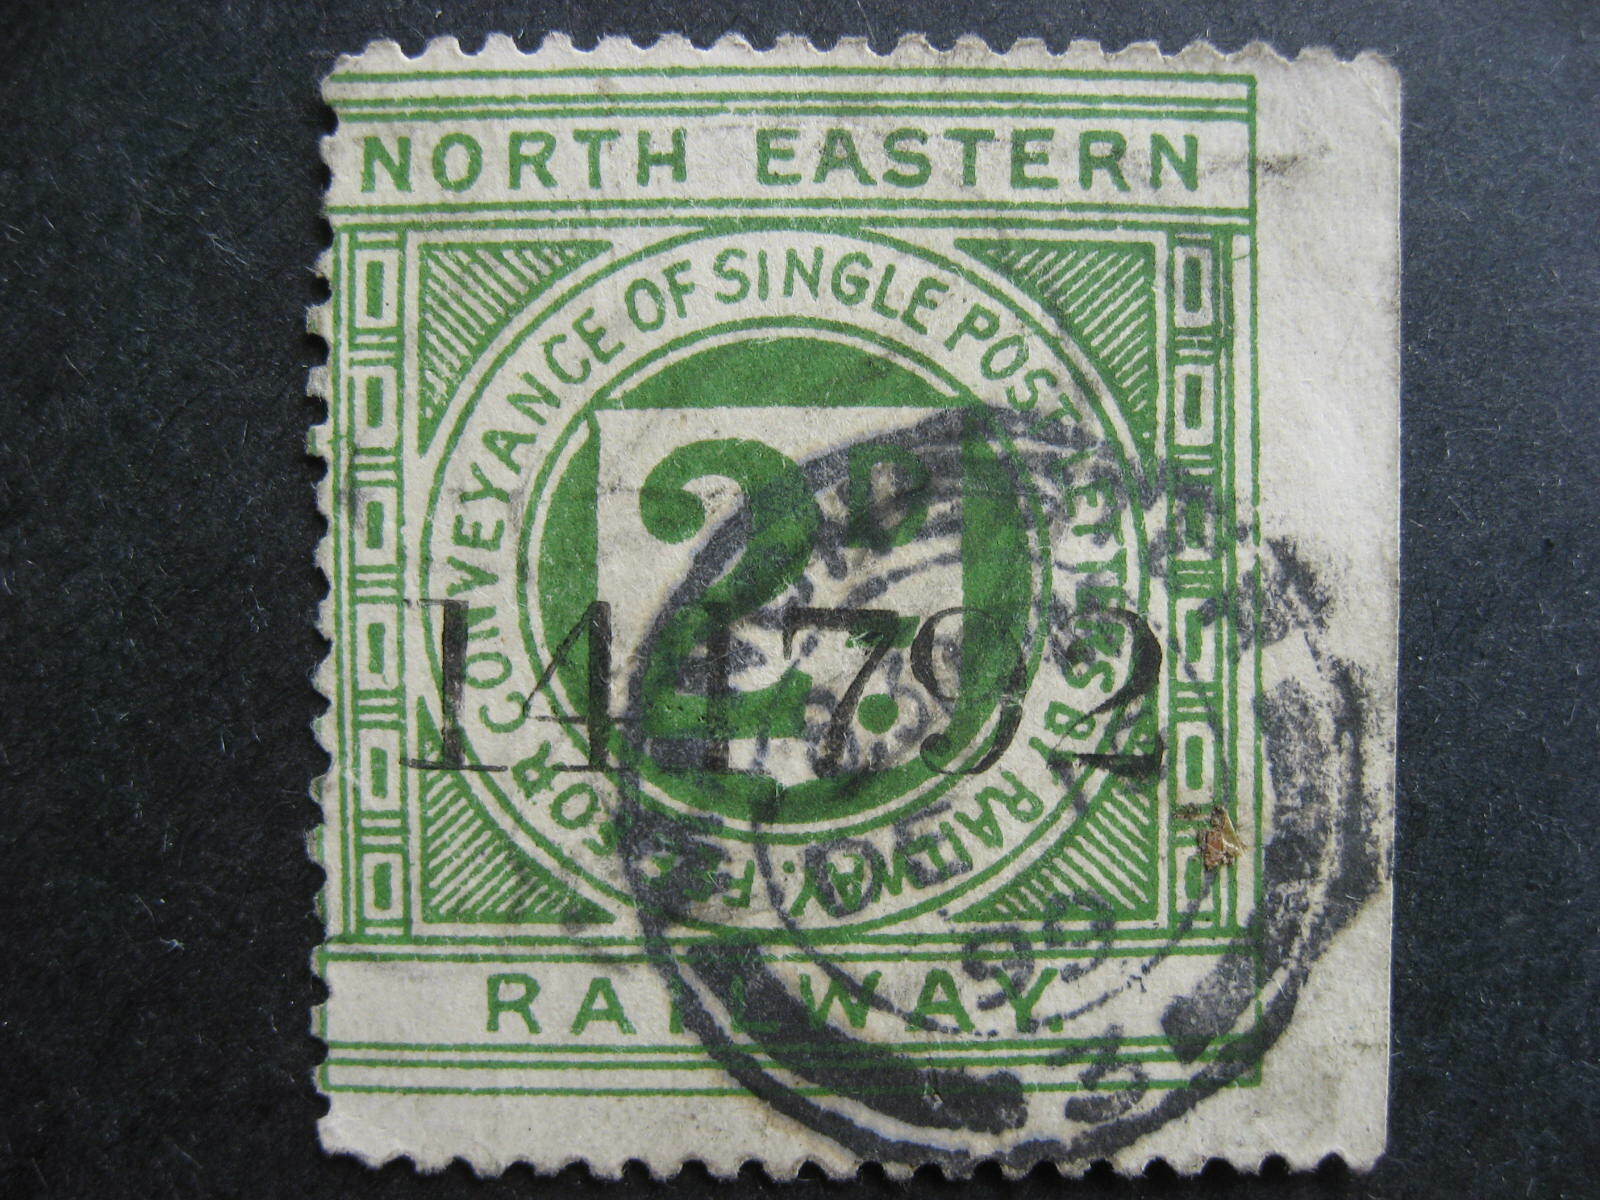 Great Britain Revenue North Eastern Railway 2p Used, Check It Out!